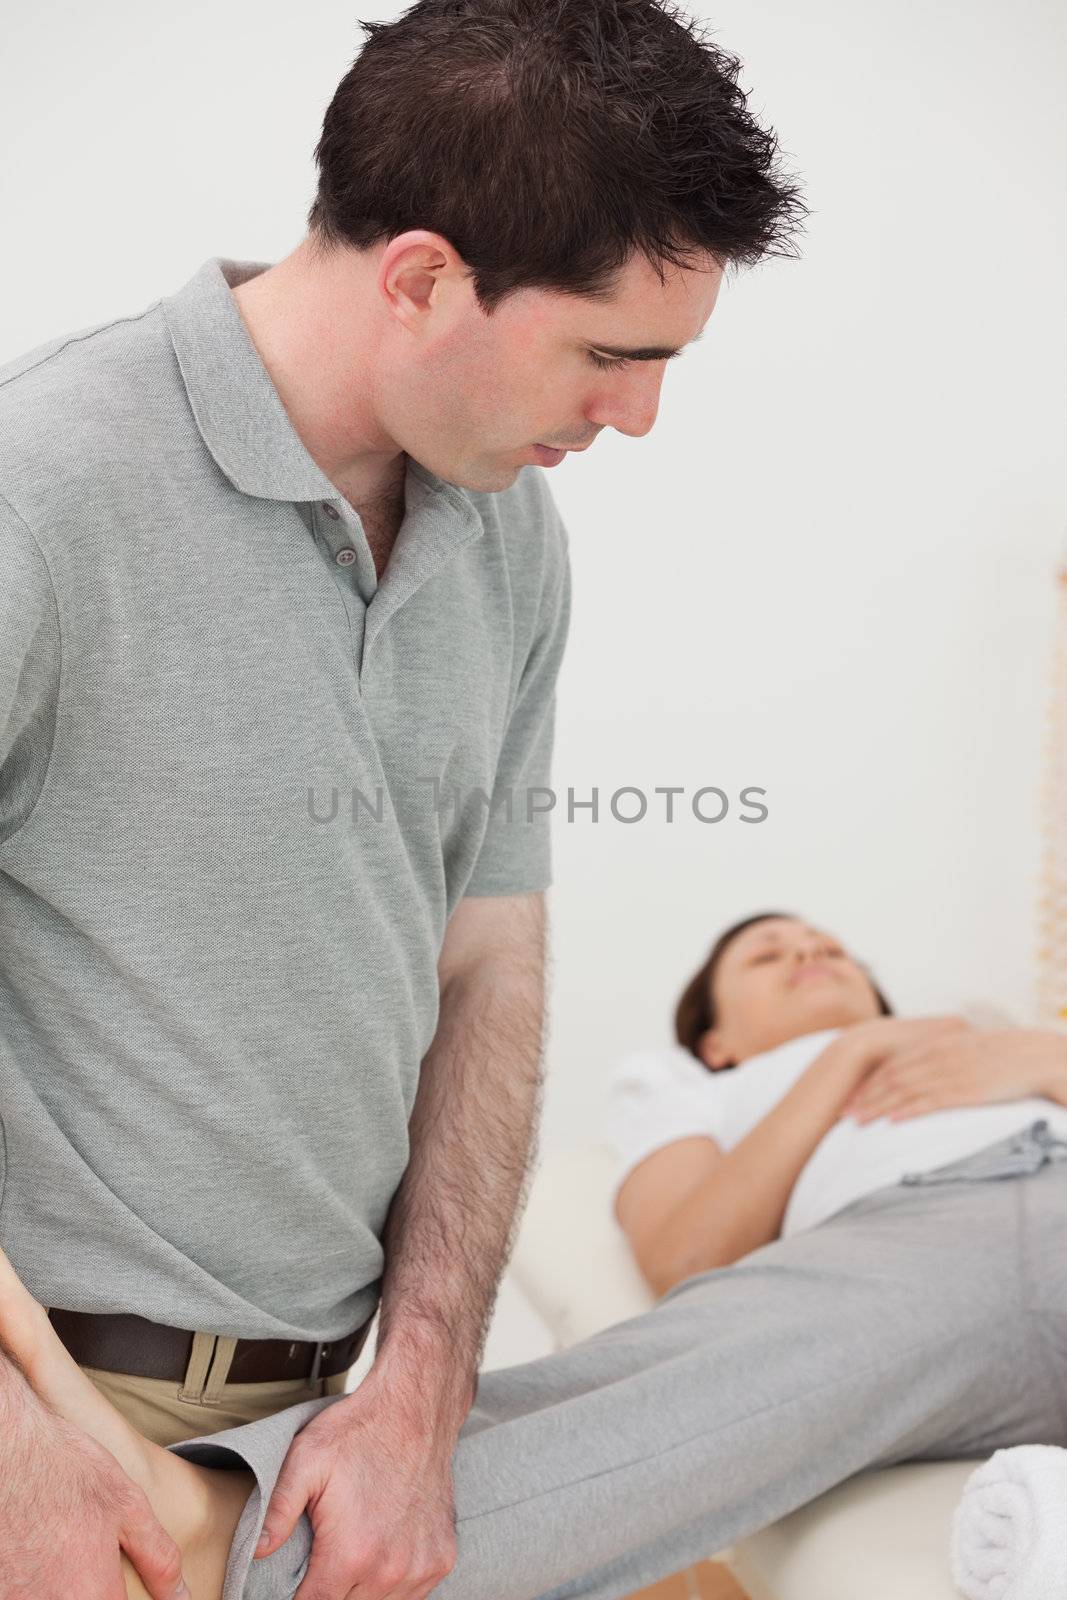 Physiotherapist stretching the leg of a woman in a room